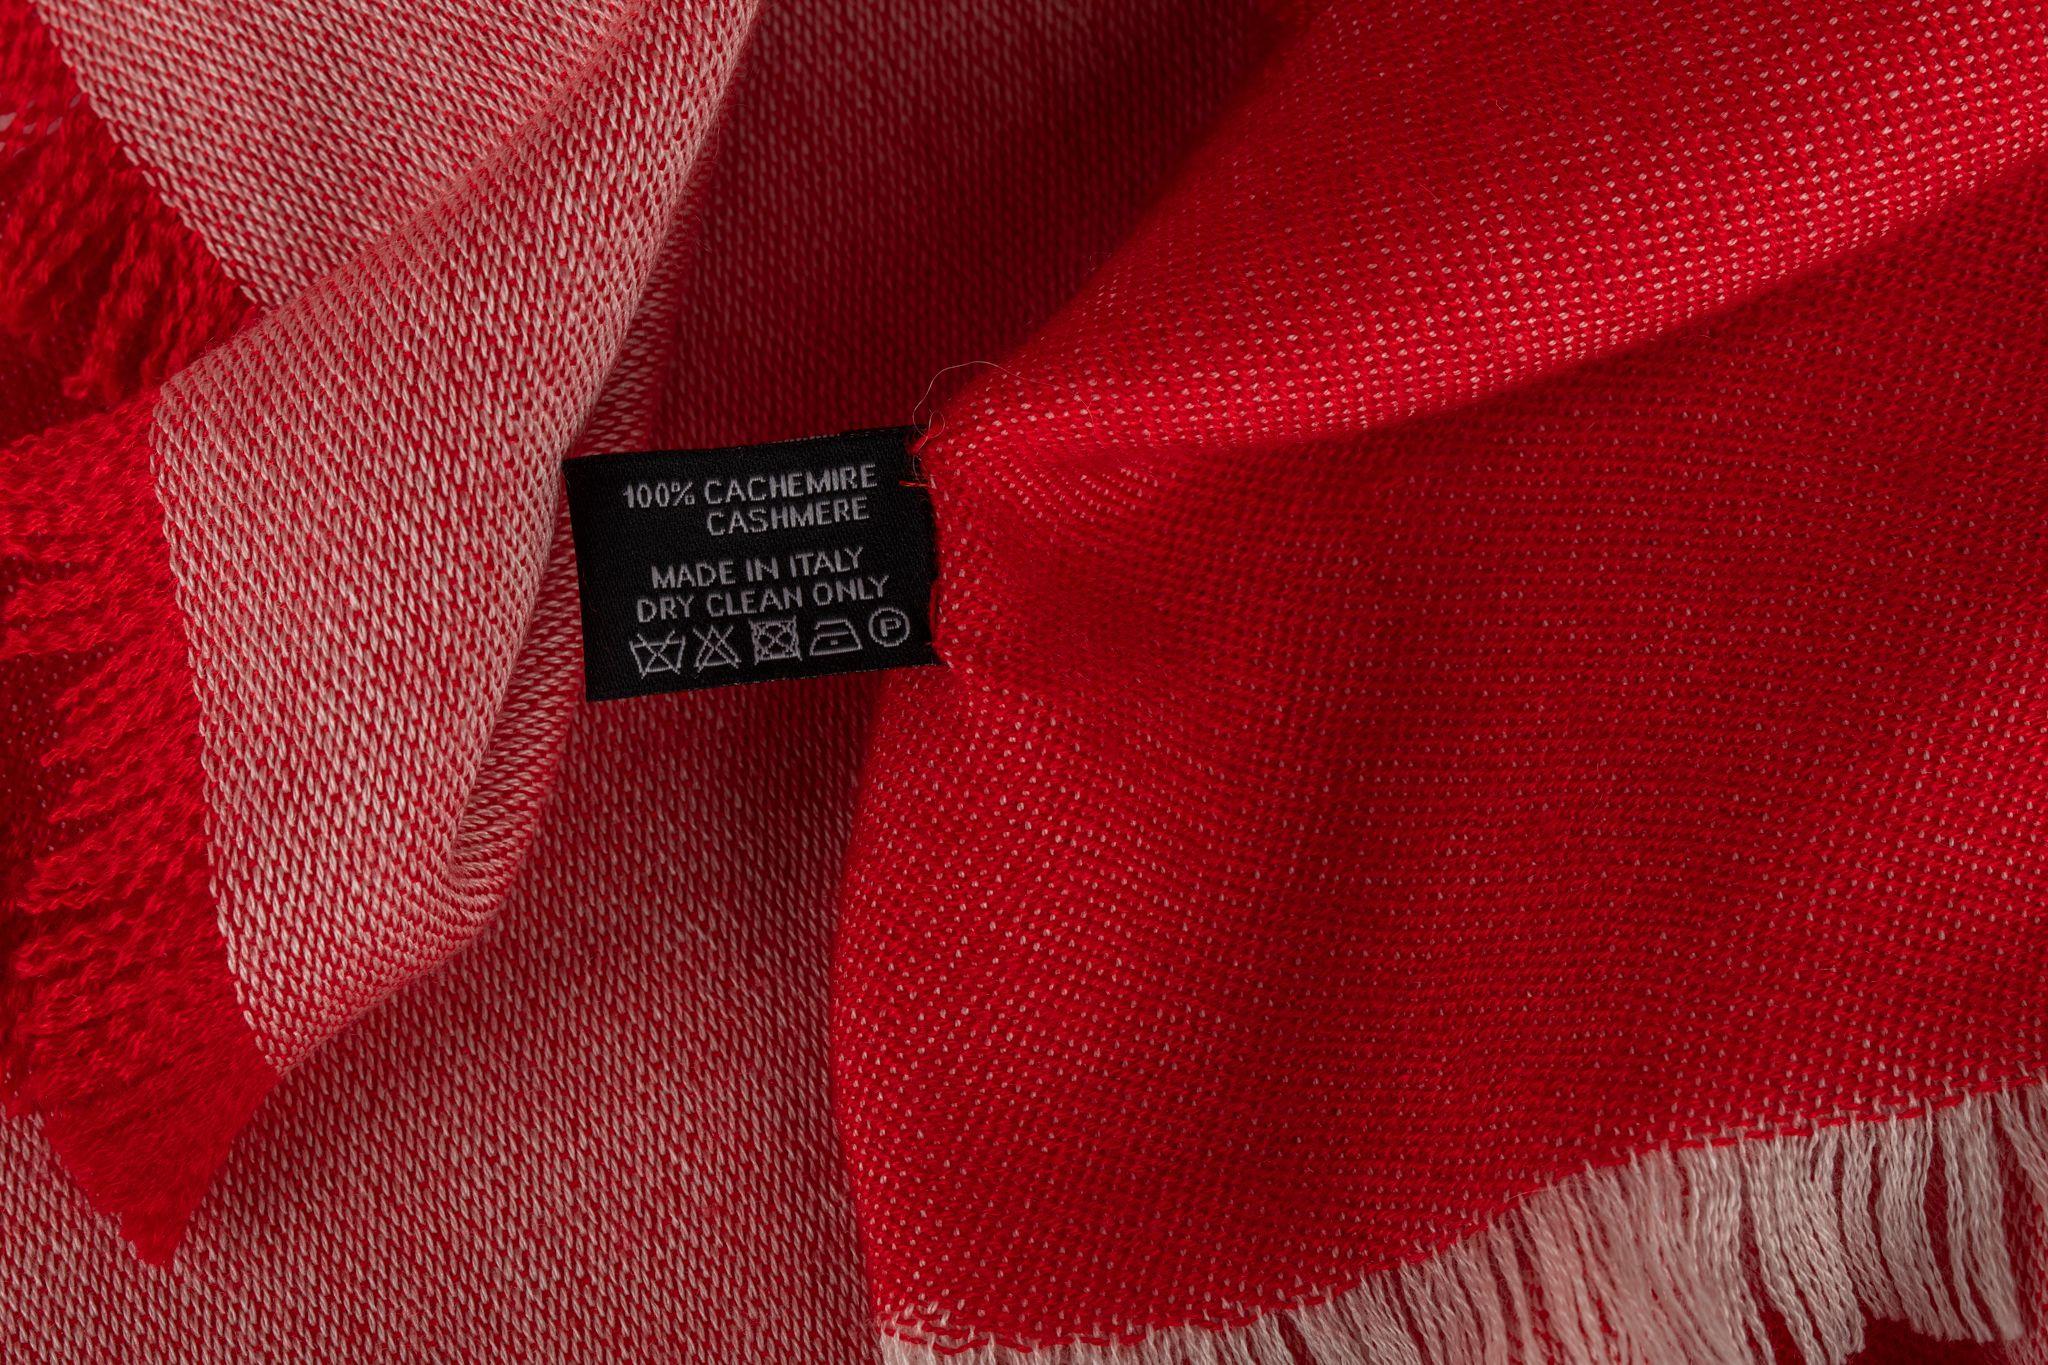 Chanel New Cashmere Shawl in Red In Excellent Condition For Sale In West Hollywood, CA